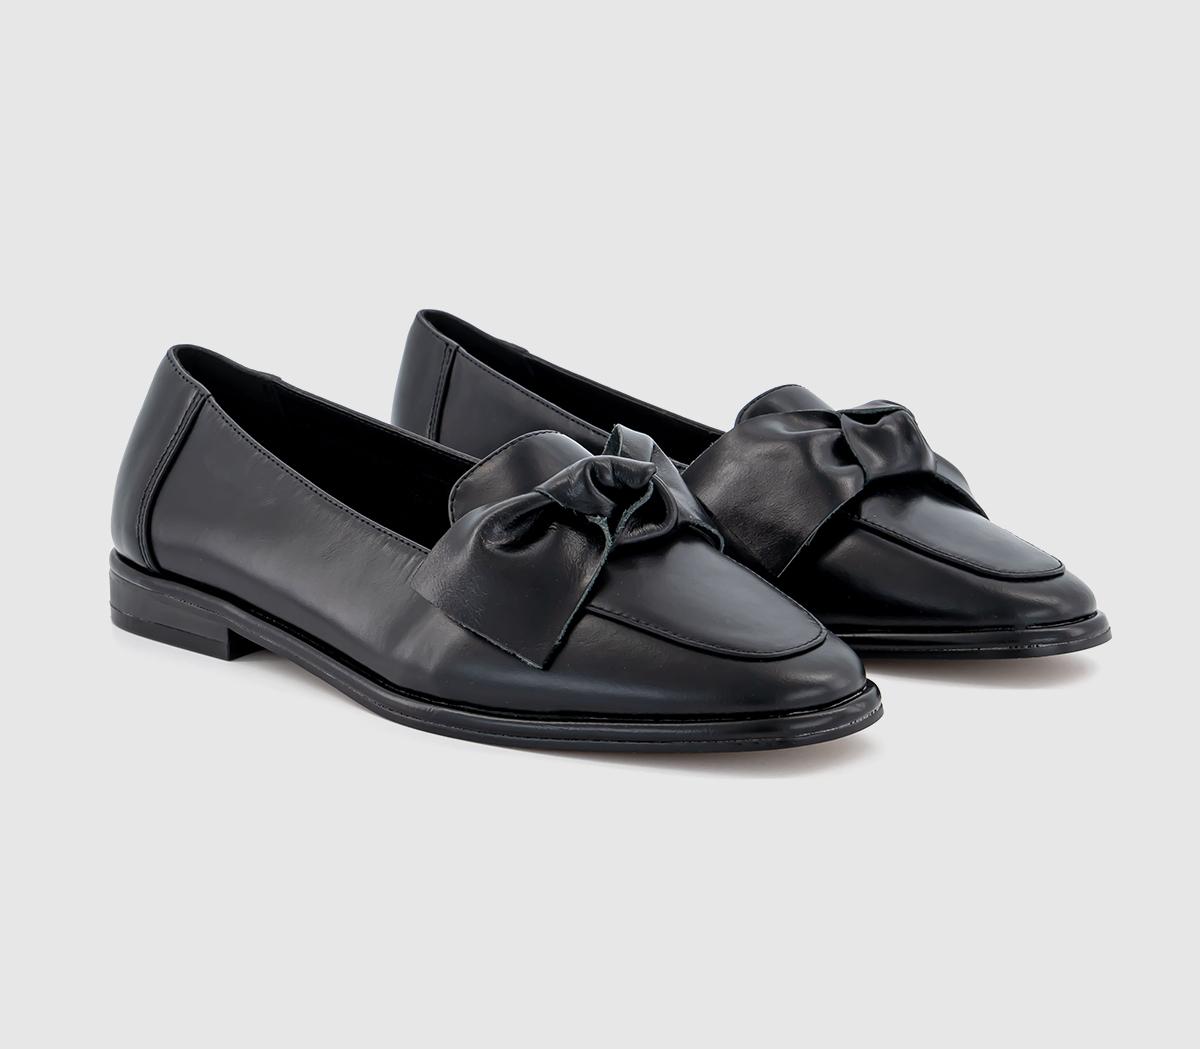 OFFICE Womens Fallon Bow Leather Loafer Black, 6